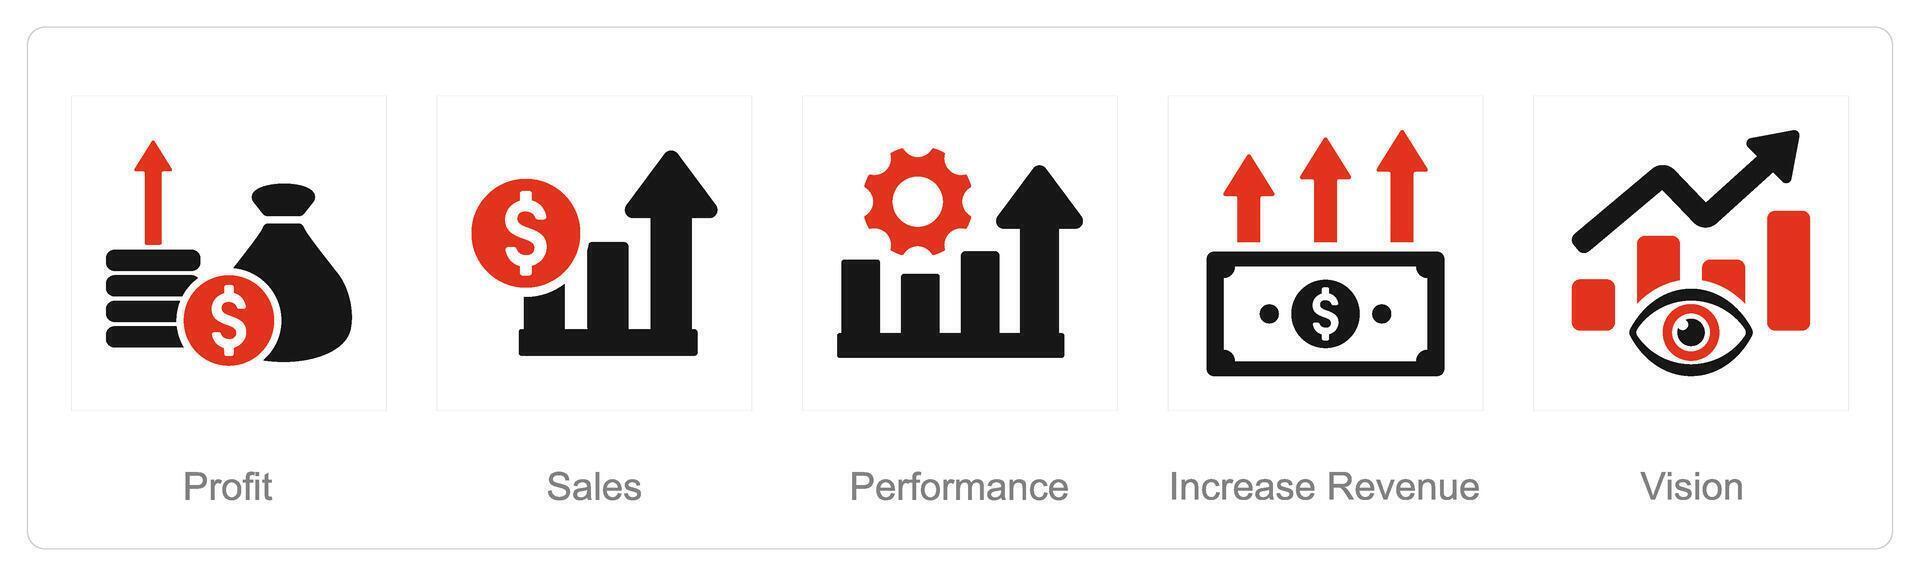 A set of 5 Increase Sale icons as profit, sales, performance vector